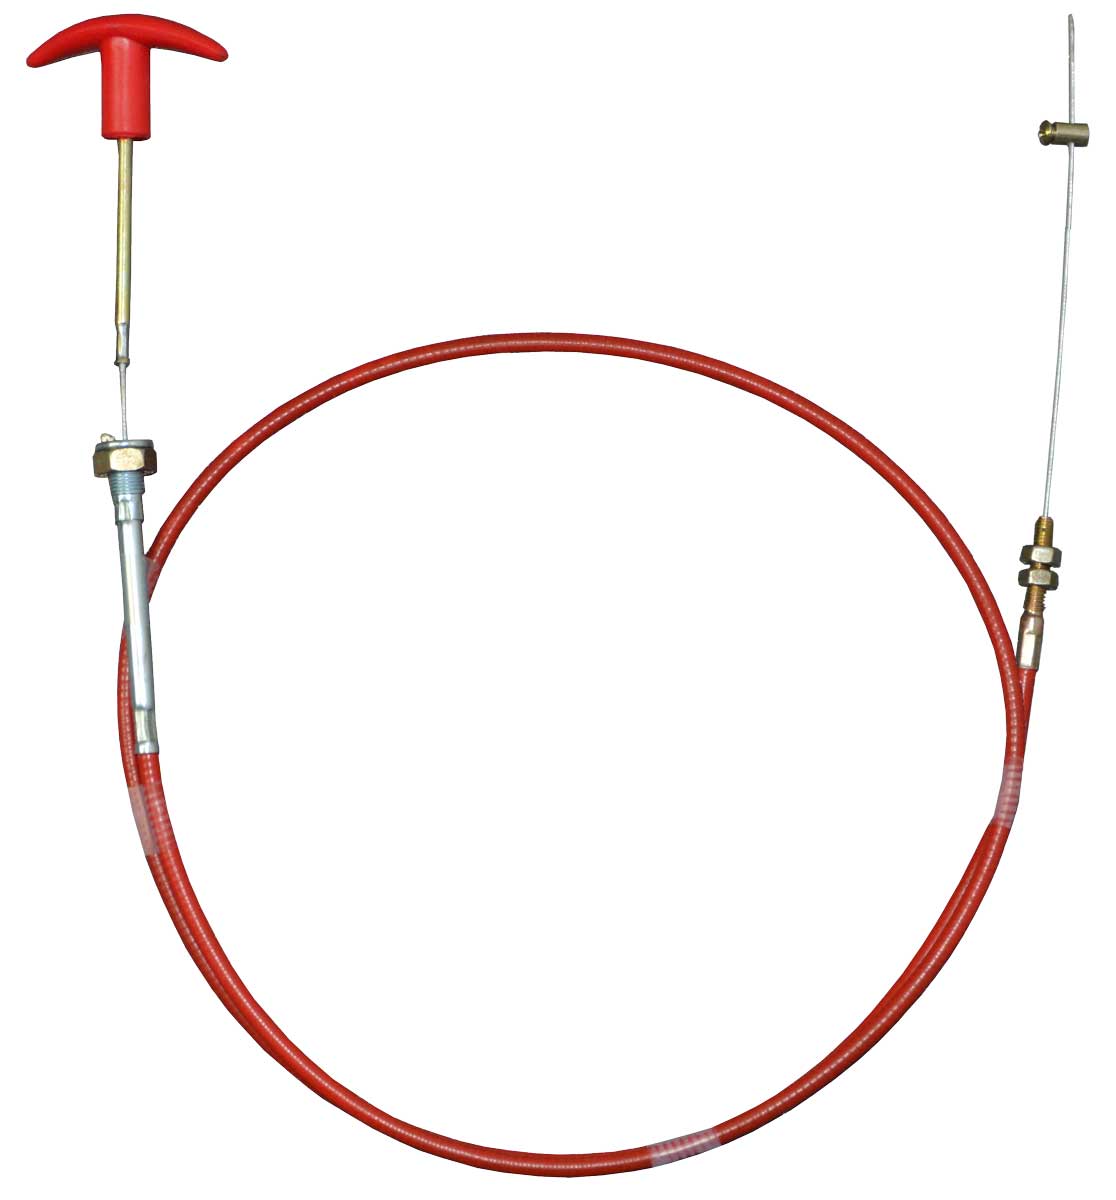 STR Pull Cable for Isolator / Fire Extinguisher